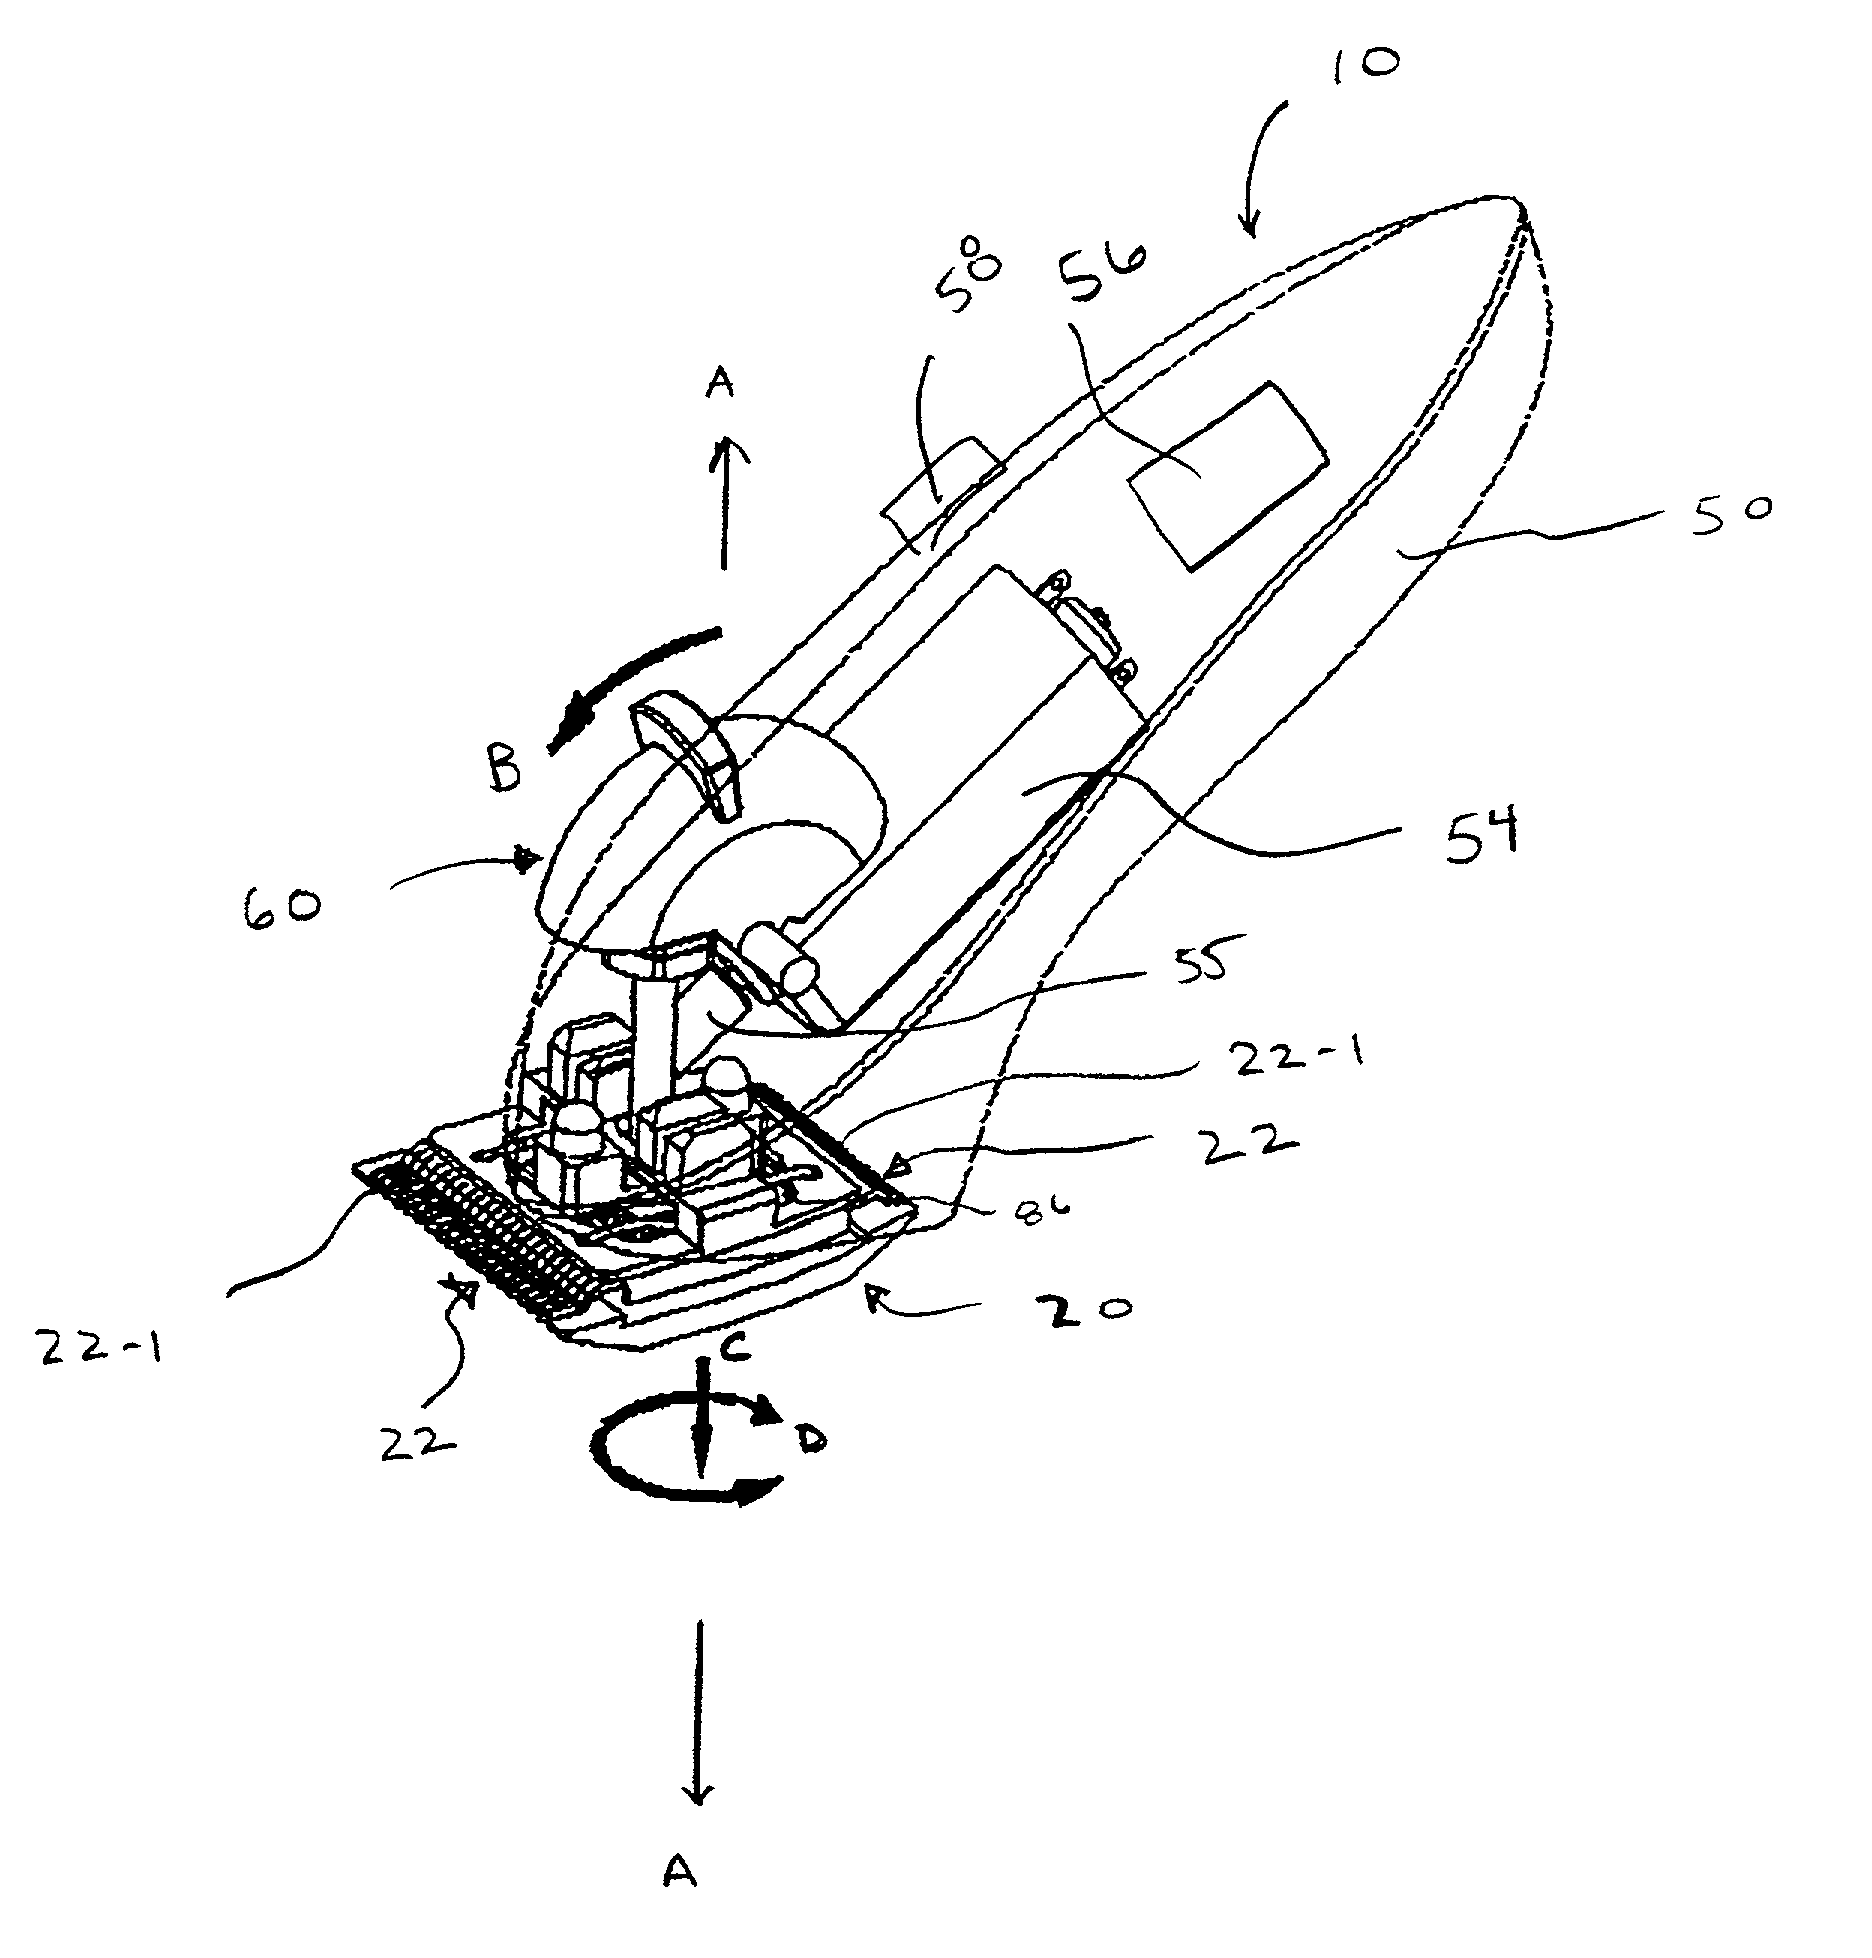 Hair clipper with rotating blade assembly